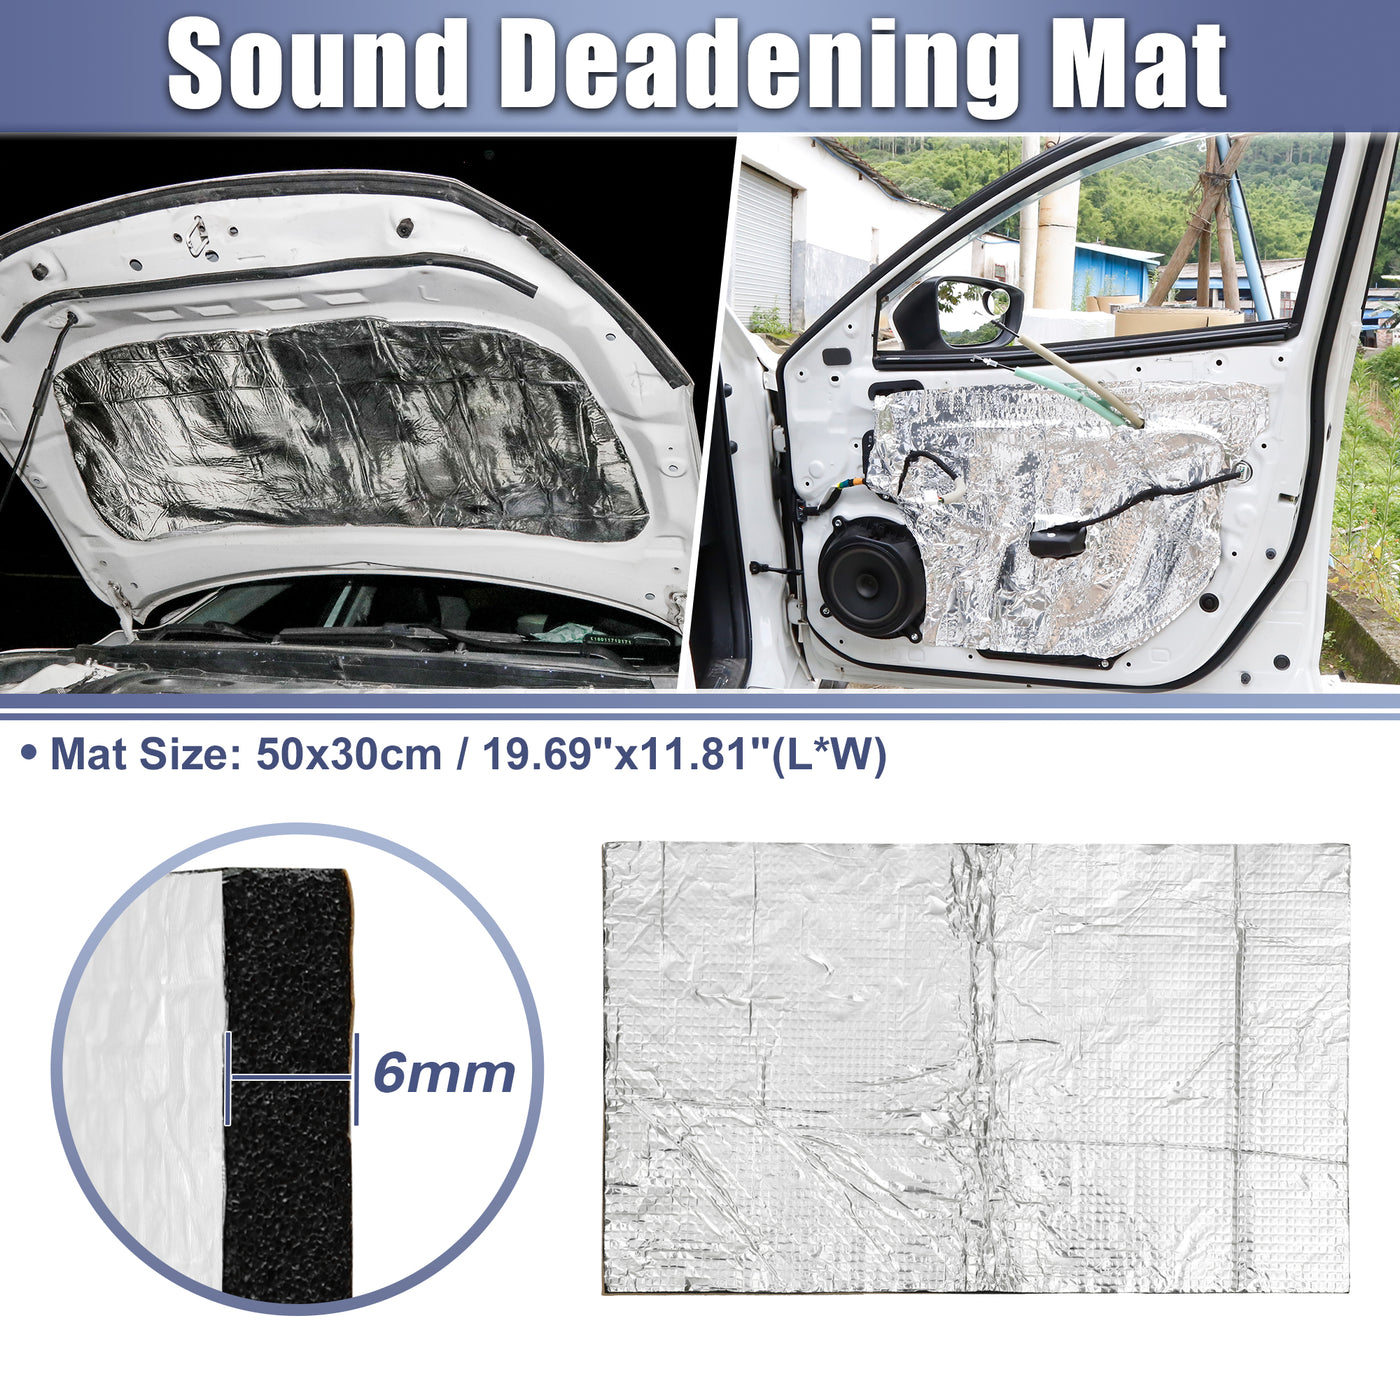 X AUTOHAUX 236mil 6mm 1.61sqft Car Sound Deadening Mat Aluminum Closed Cell Foam Heat Shield Material Damping Self Adhesive Universal for Hood Fender and Boat Engine Cover 19.69"x11.81"